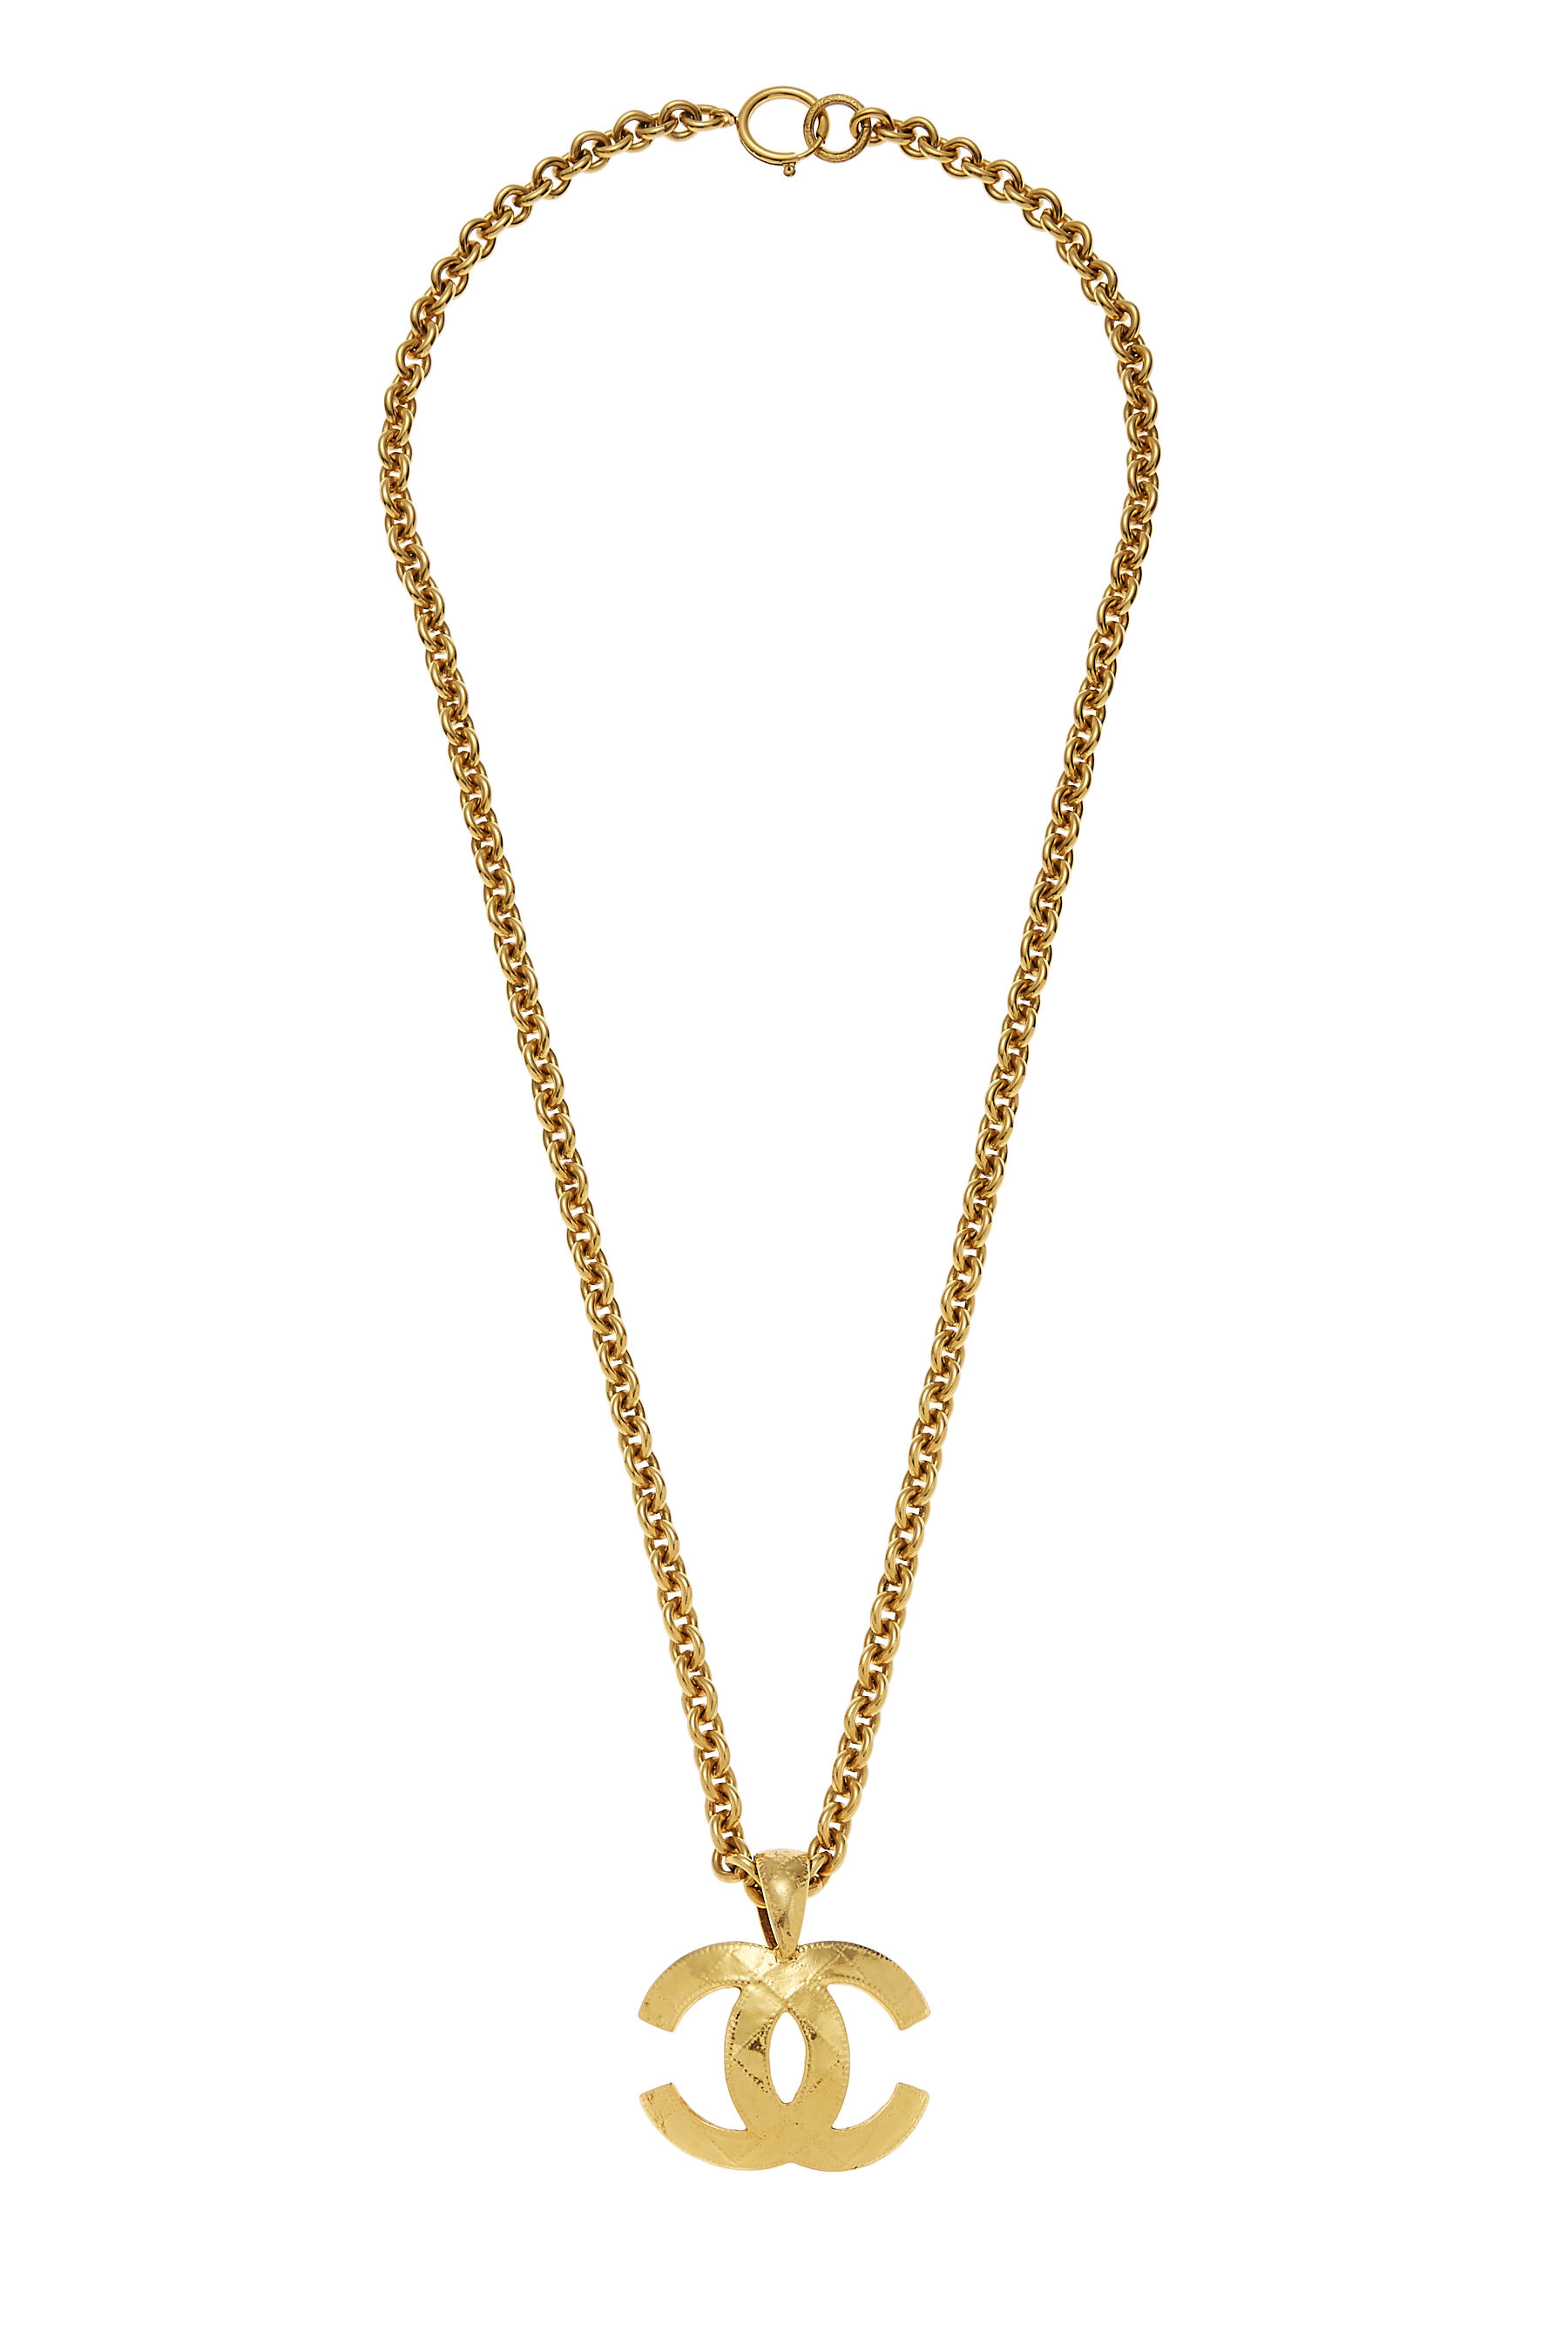 Chanel - Gold Quilted 'CC' Necklace Large